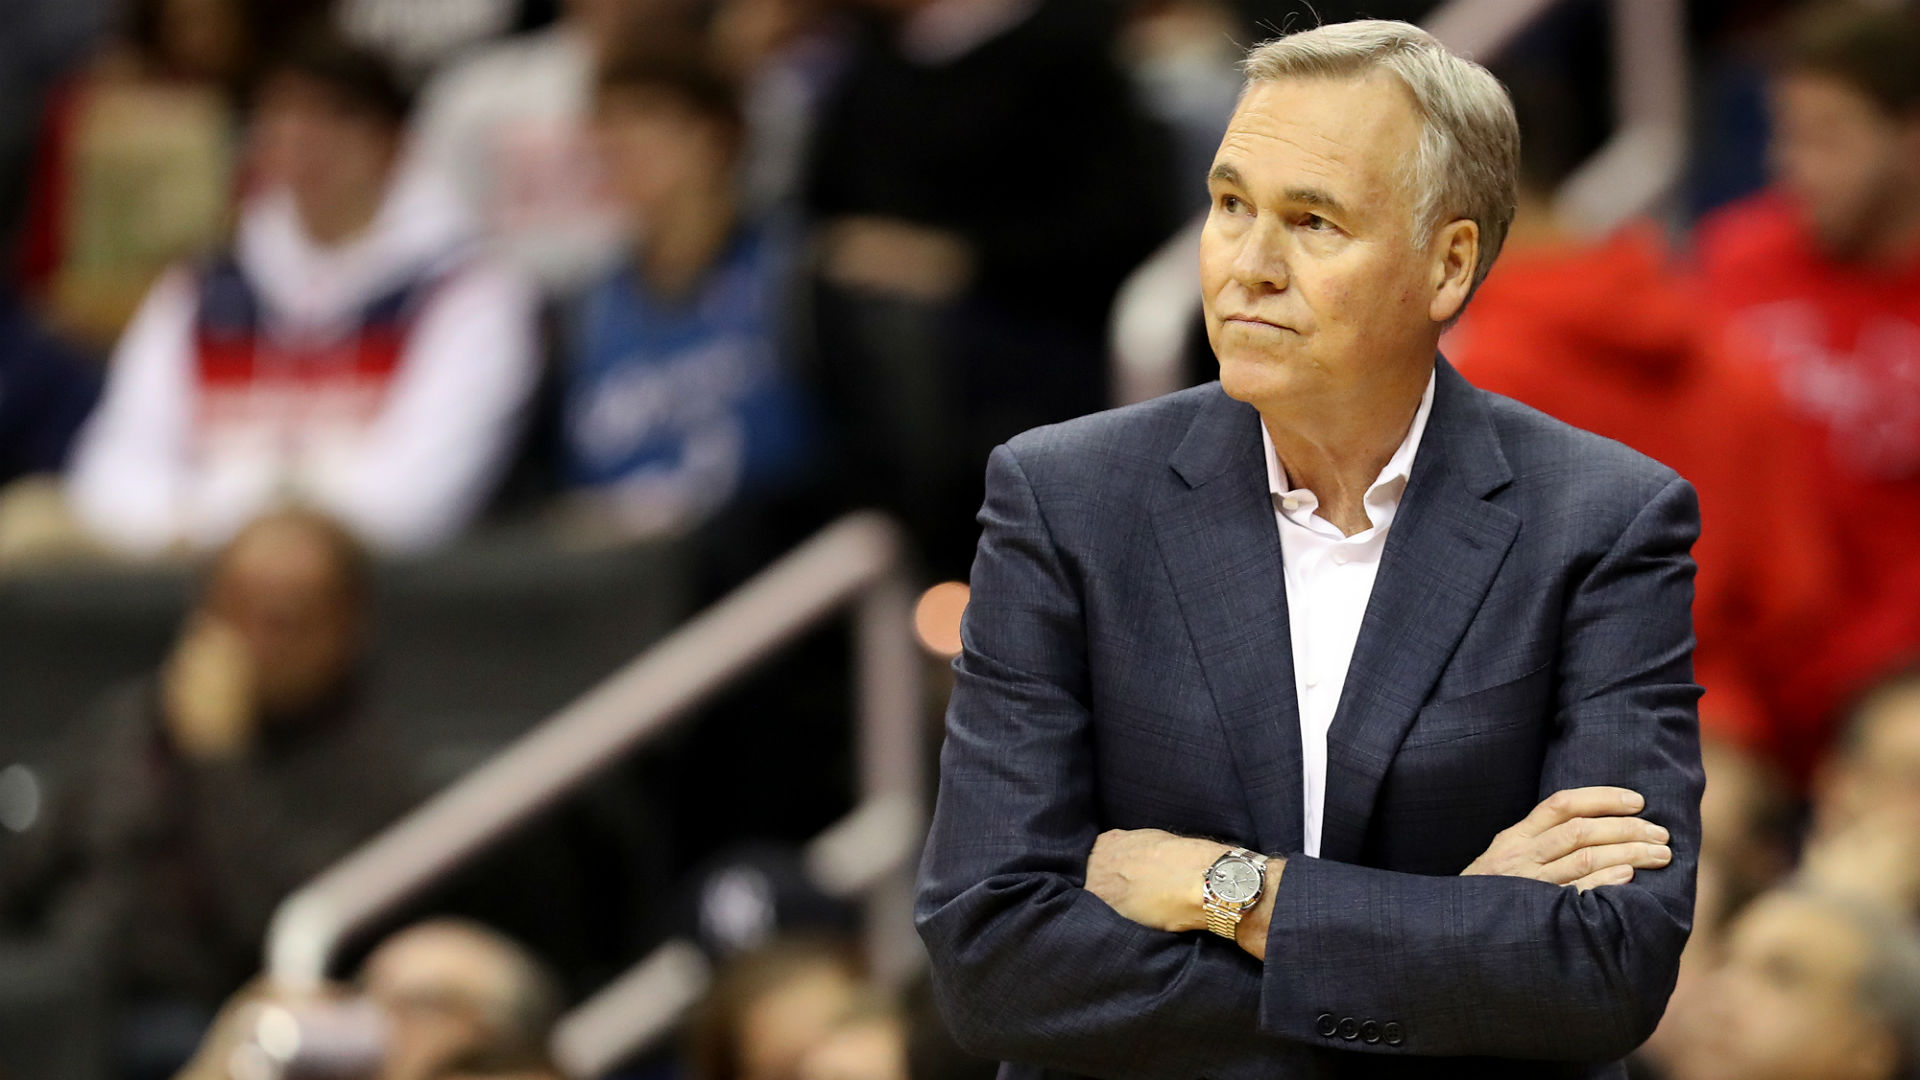 The Houston Rockets can challenge the Golden State Warriors, according to coach Mike D'Antoni.